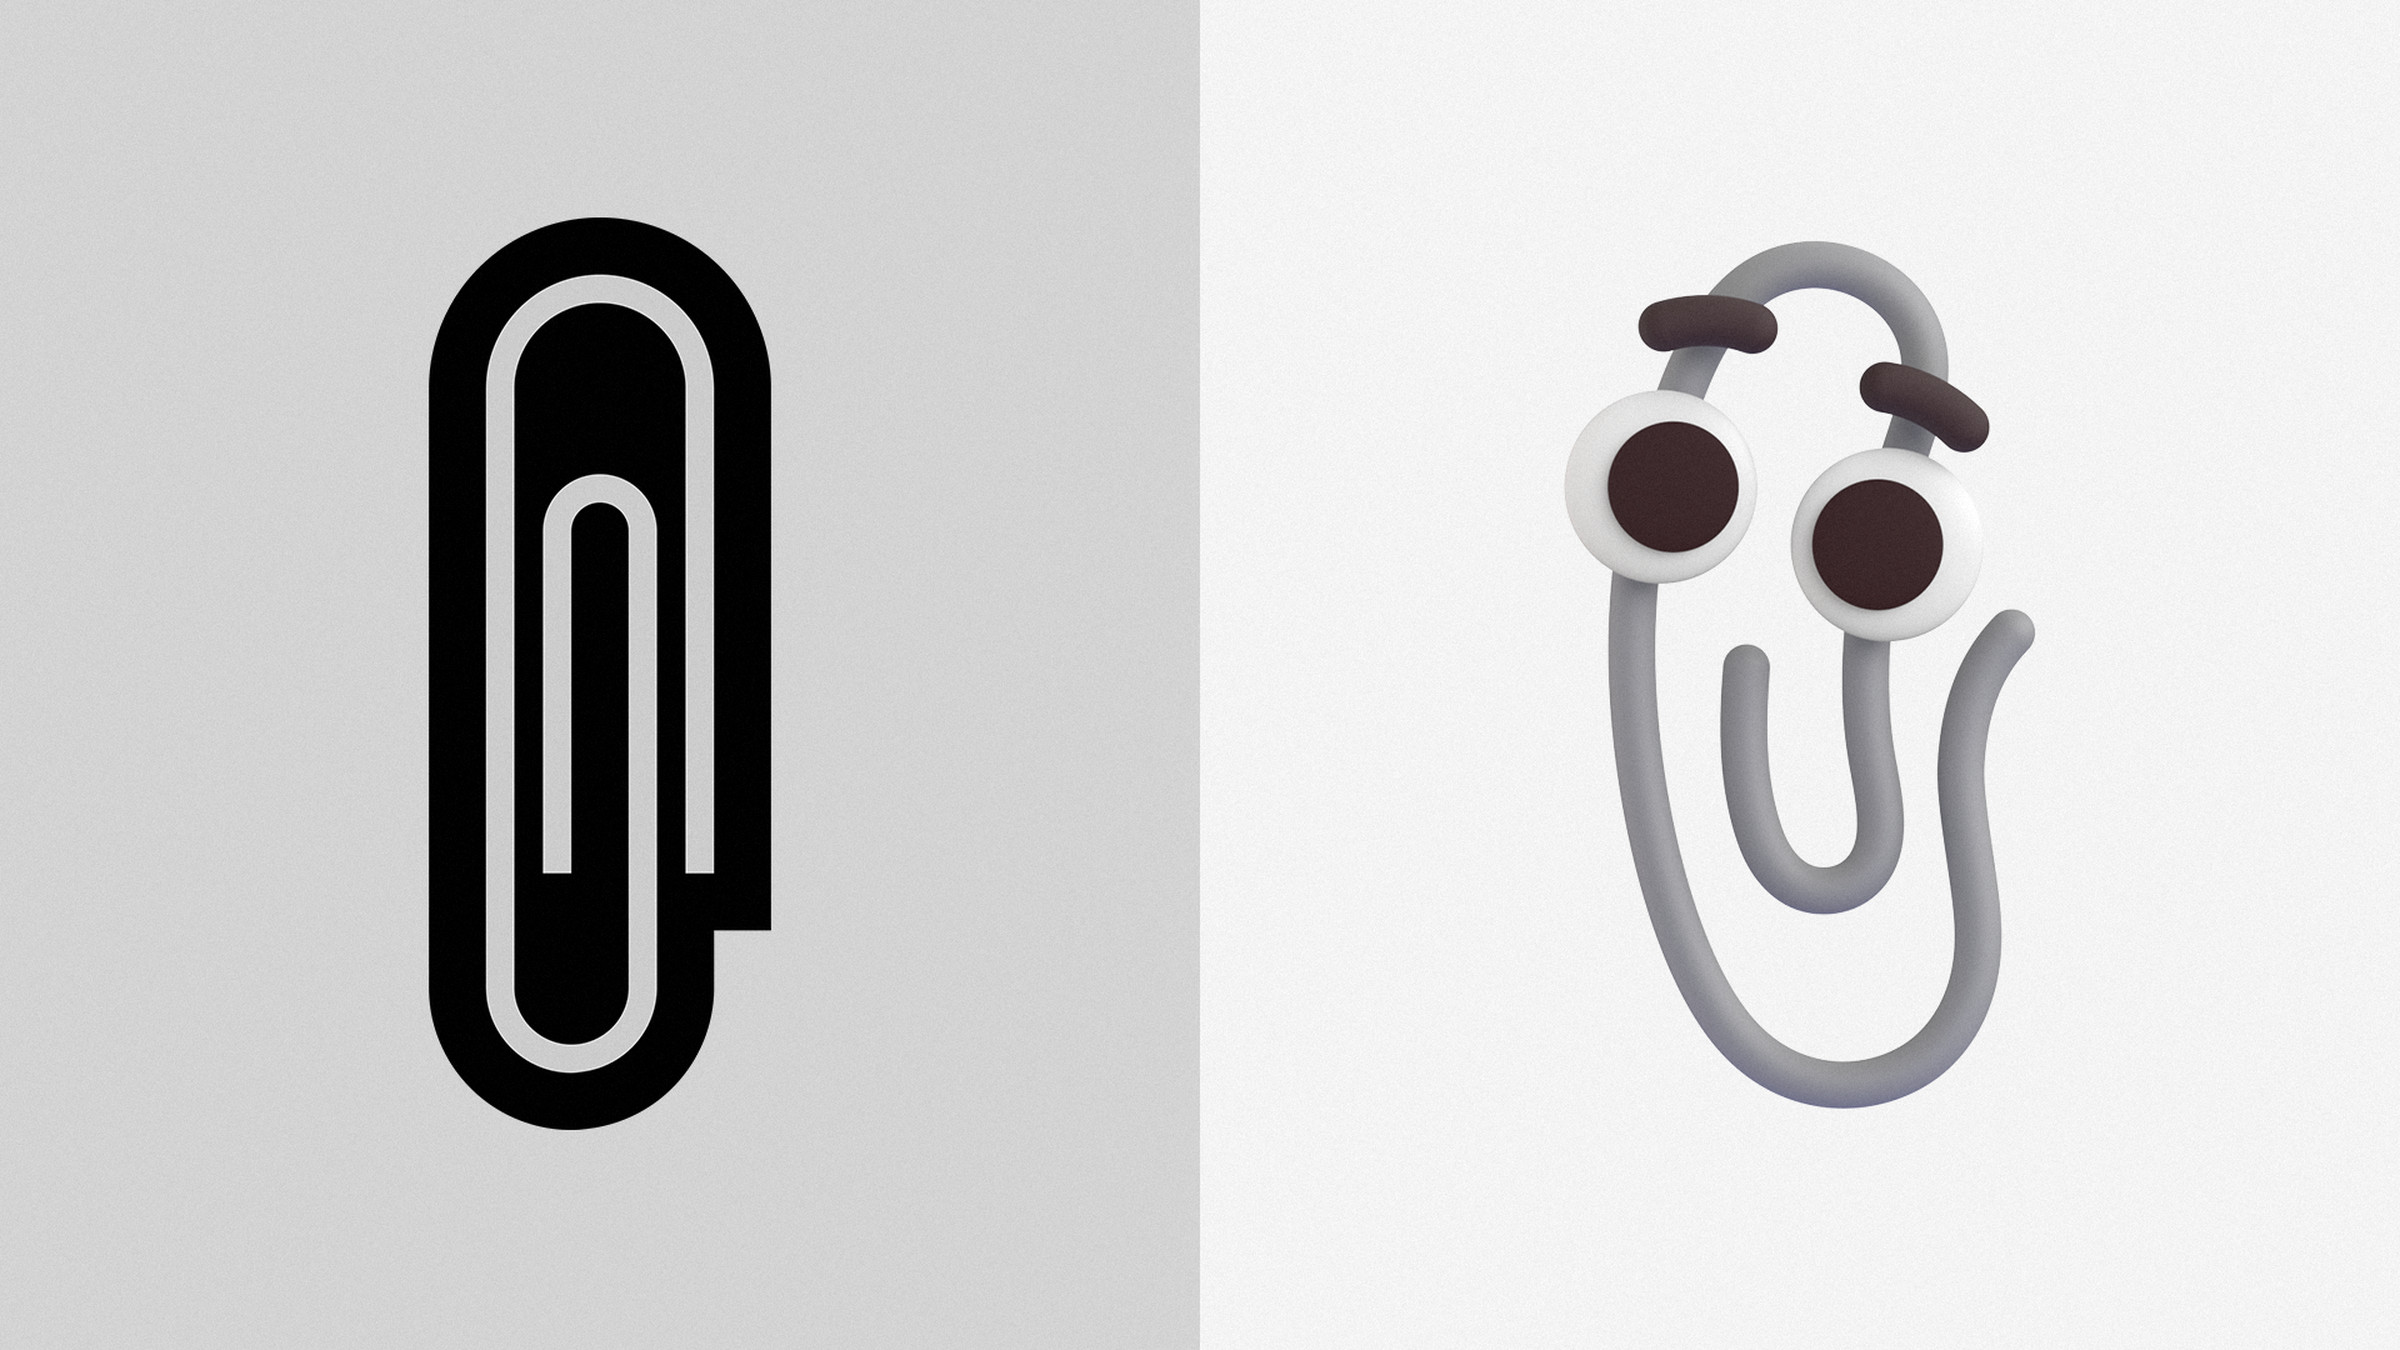 Clippy replaces the old and flat paperclip.